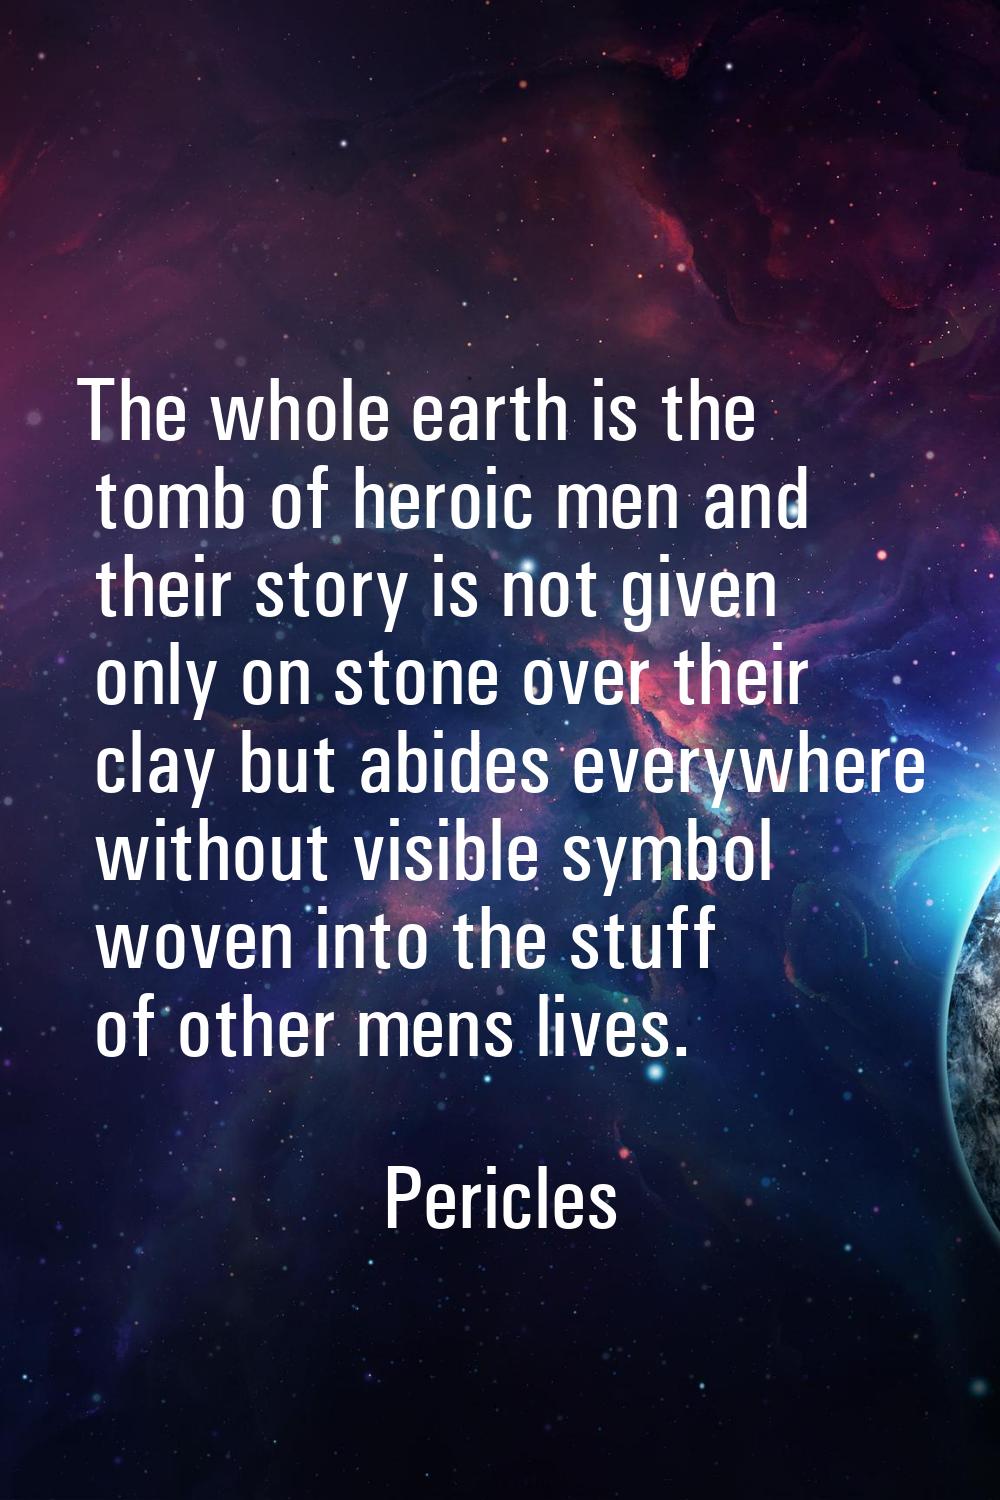 The whole earth is the tomb of heroic men and their story is not given only on stone over their cla